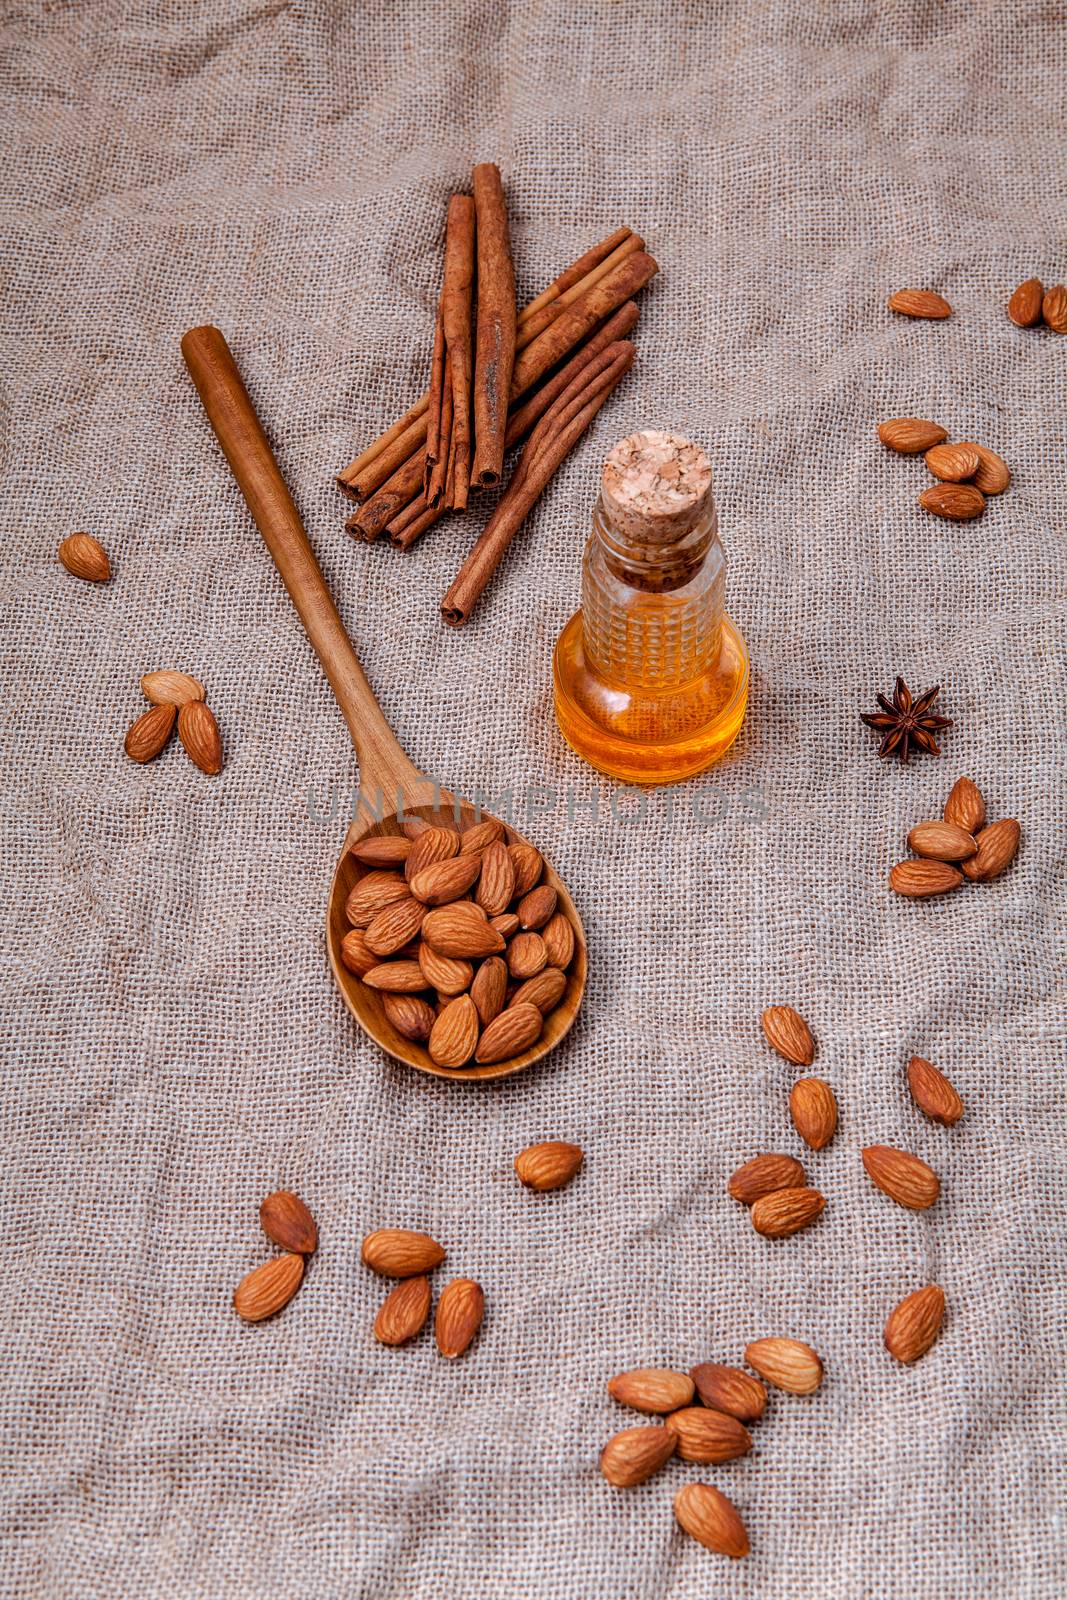 Bottle of extra virgin almonds oil with whole almonds and cinnamon sticks on hemp sack background.